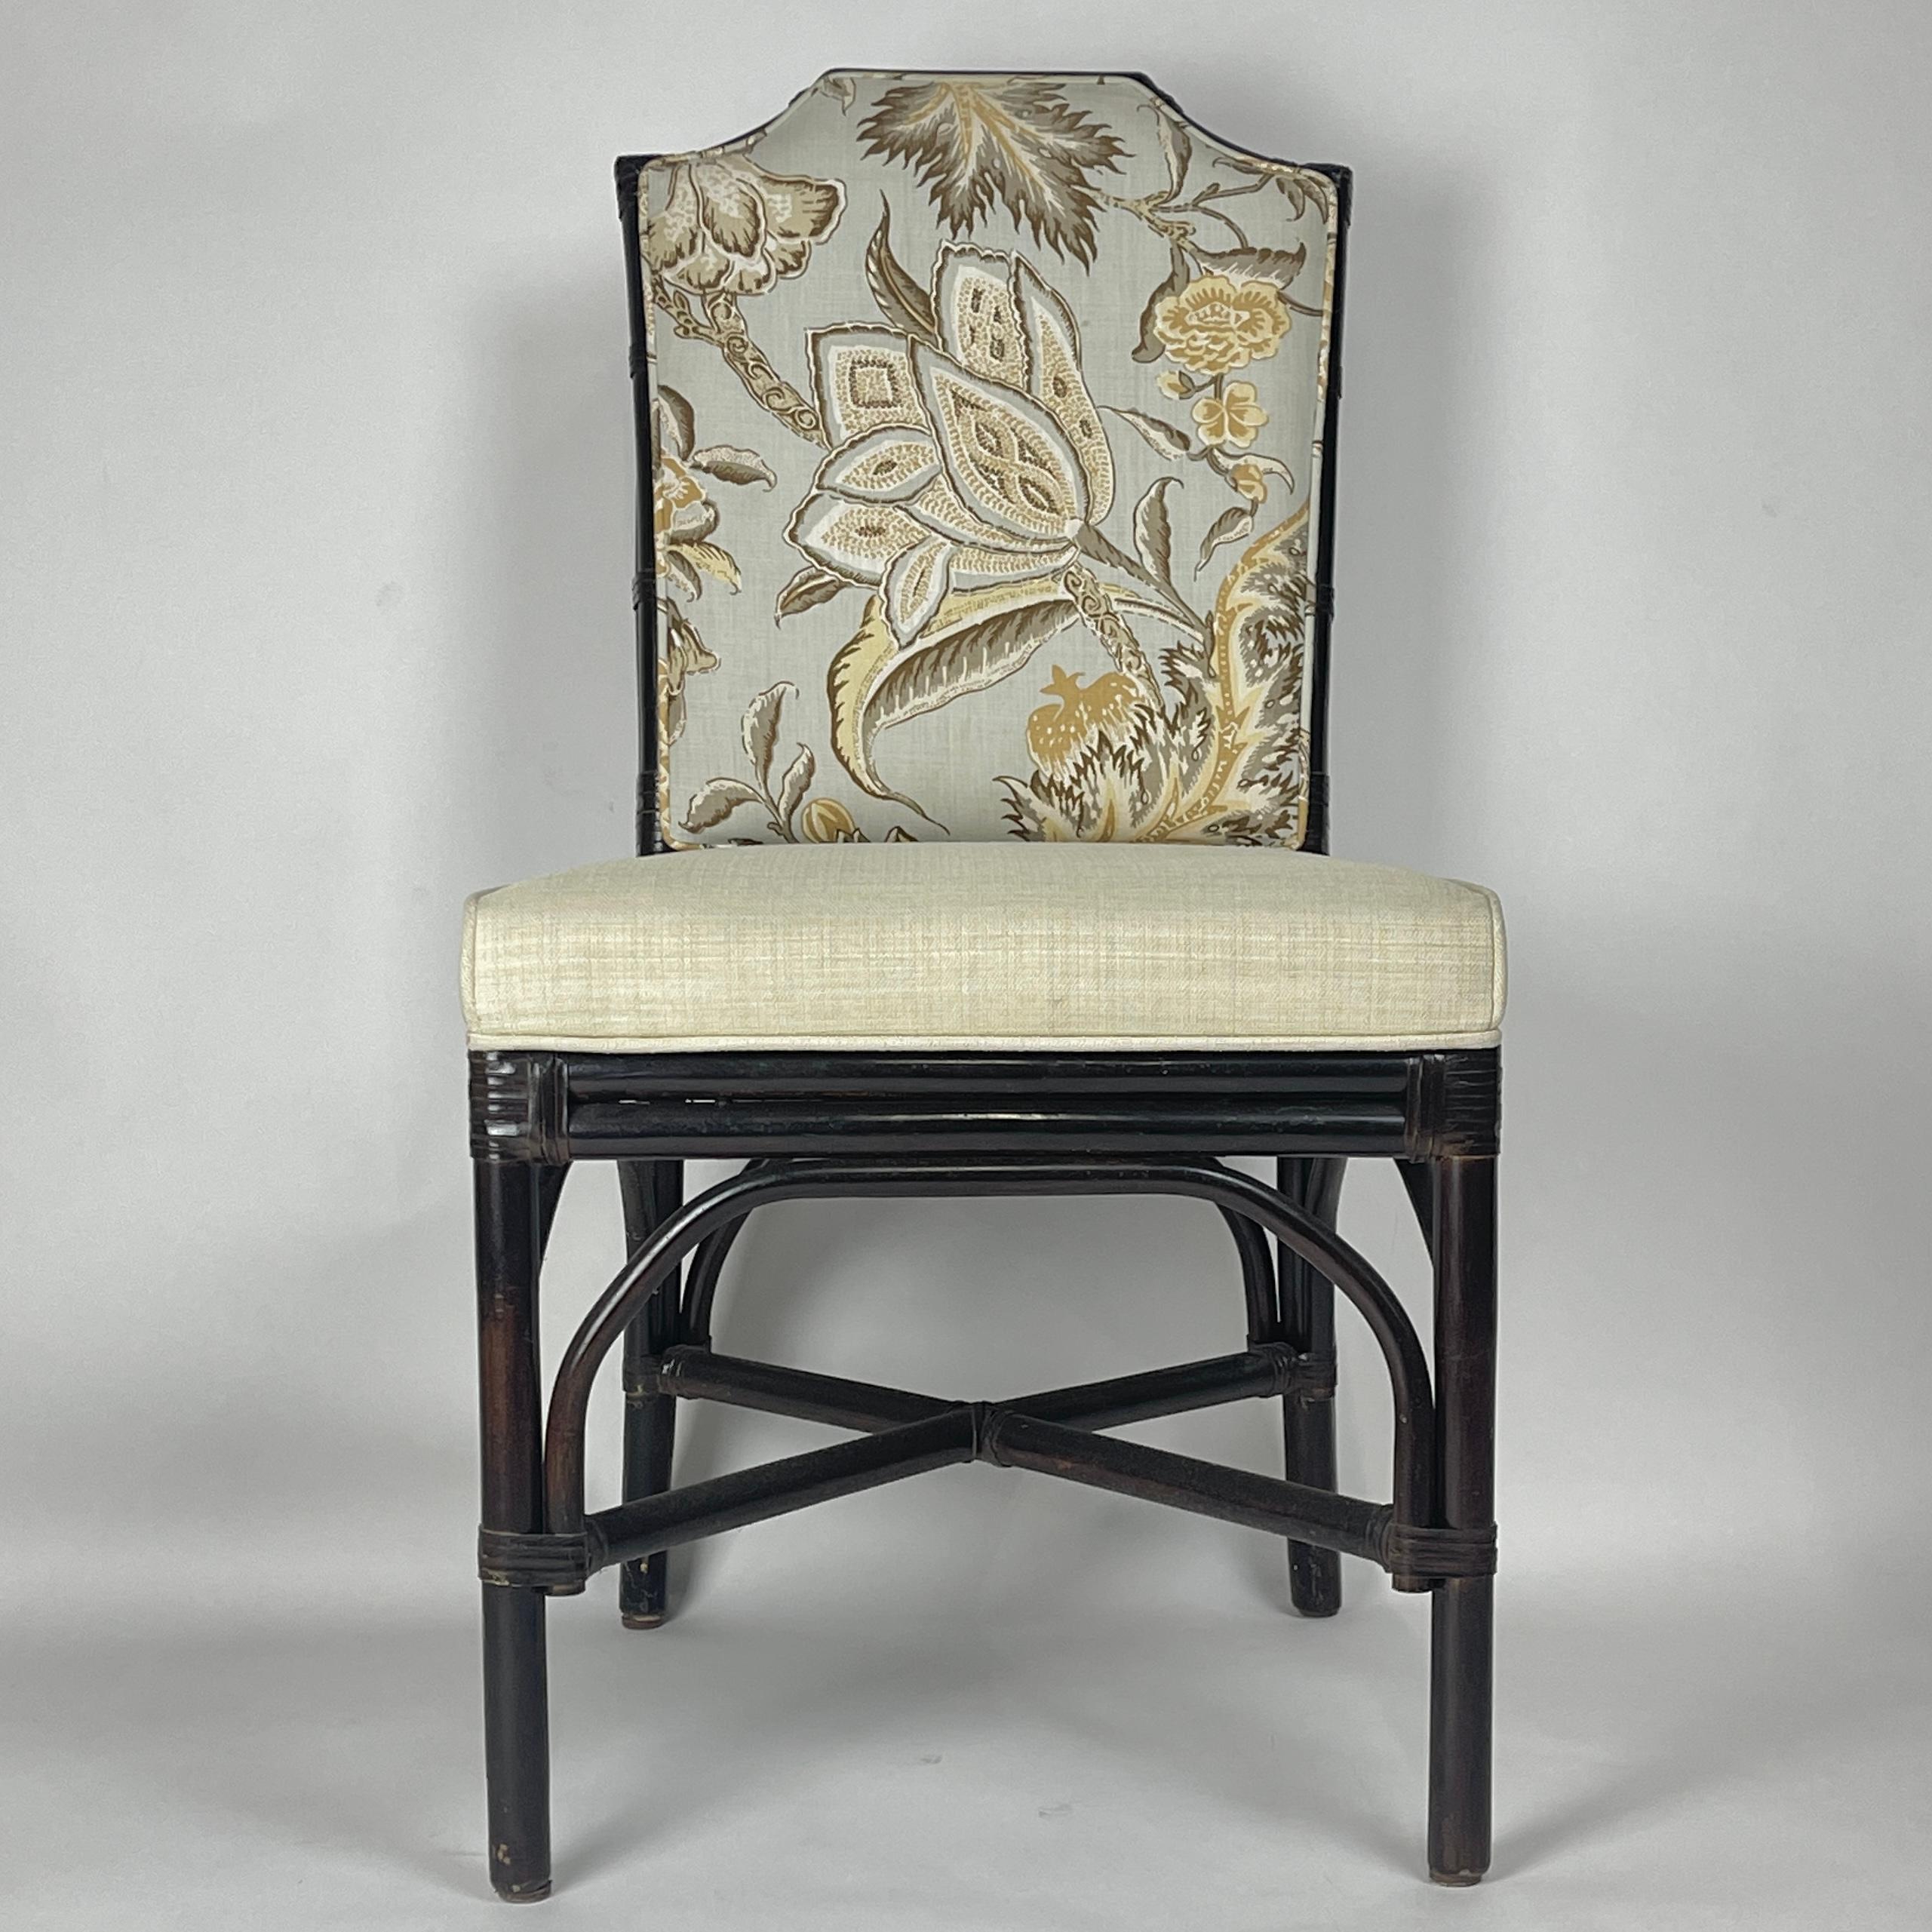 Set of 6 stunning ebonized chinoiserie Chinese Art Deco style dining chair with lovely yet sturdy upholstery. These chairs are solid and perfect for everyday use.
This listing is for 6 chairs. We have 2 sets of six chairs available.

